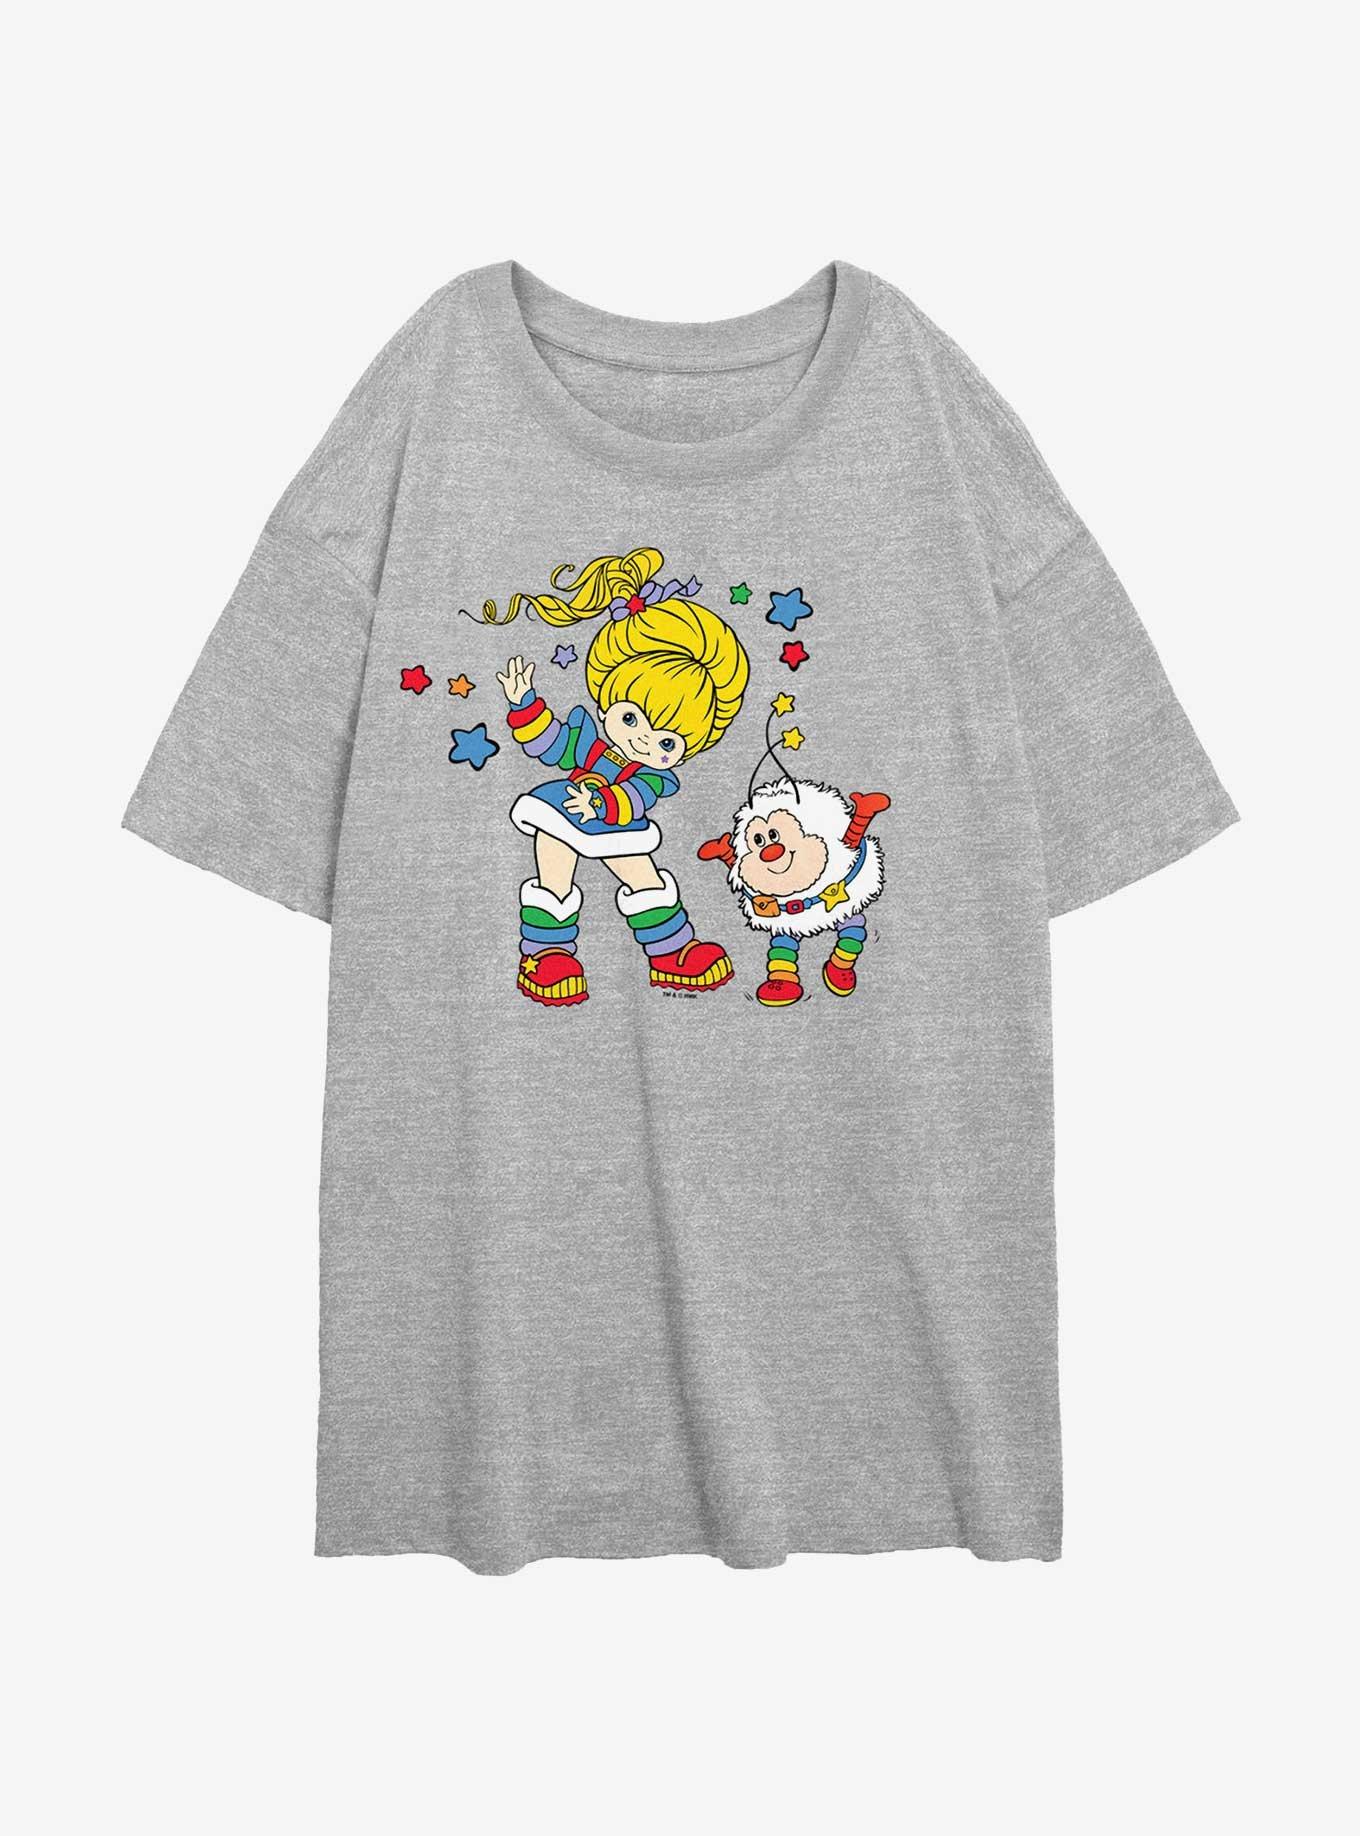 Rainbow Brite and Twink Girls Oversized T-Shirt, ATH HTR, hi-res